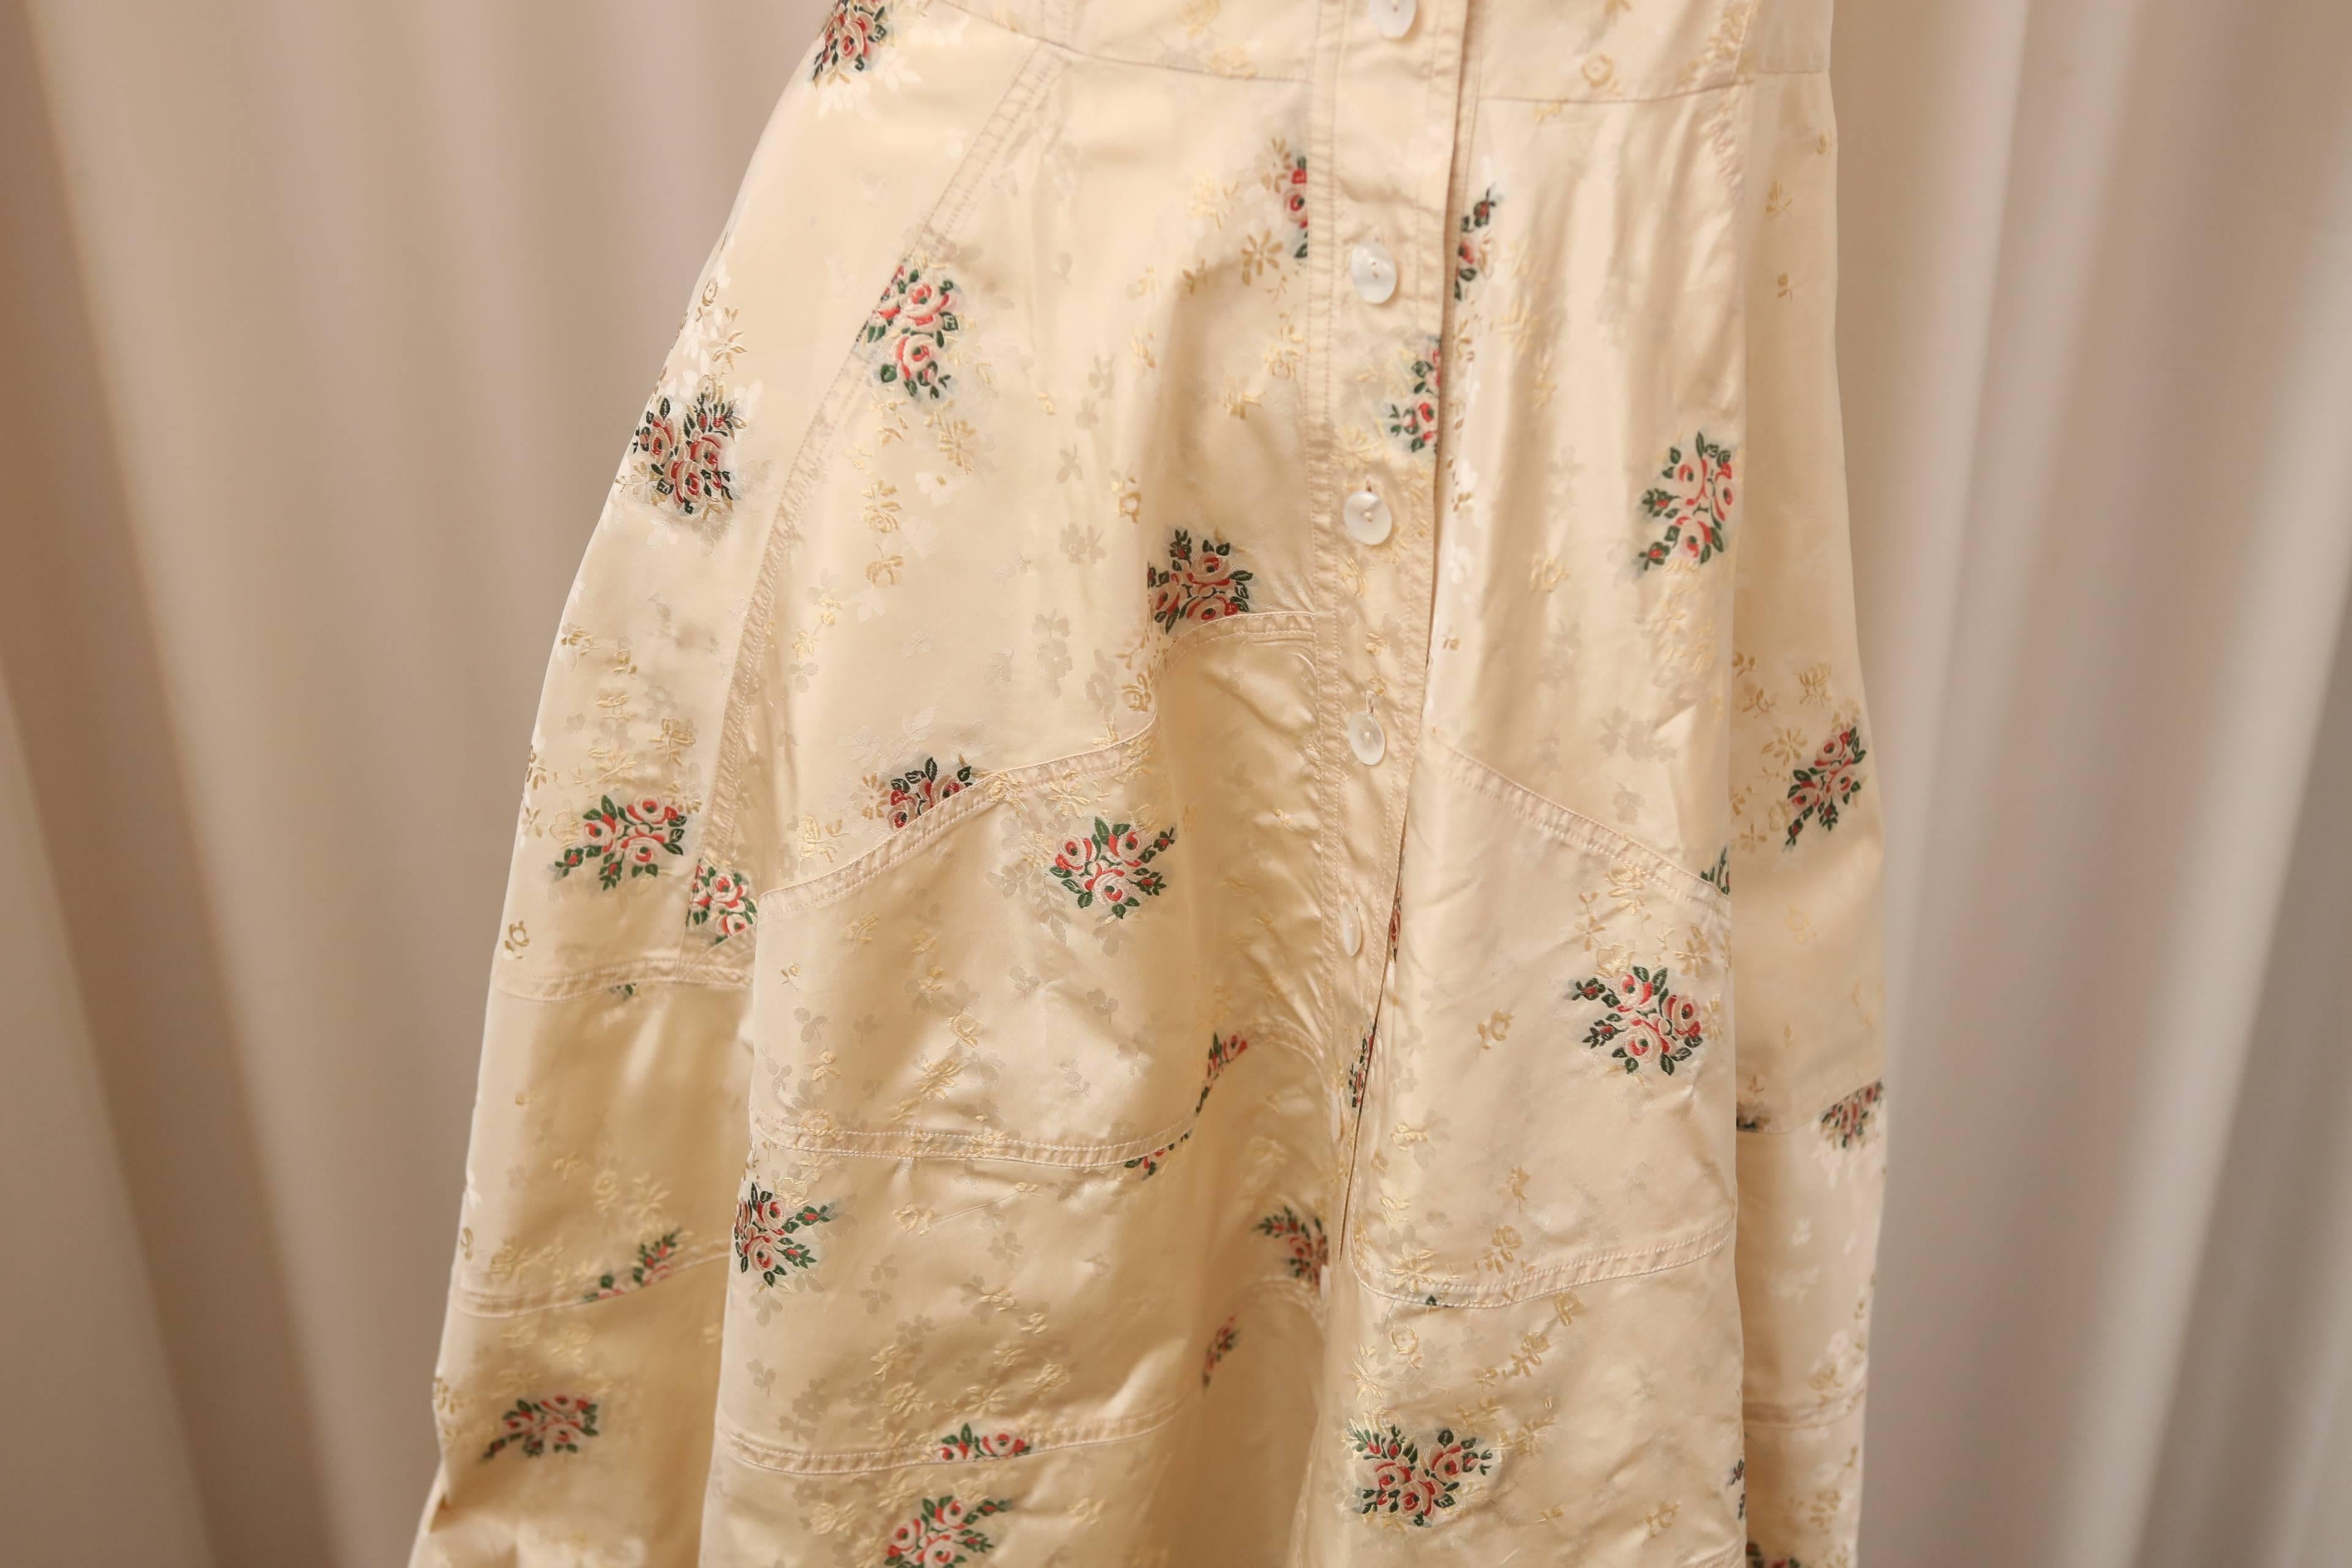 Christian Dior s/s beige button down dress with floral detail.

